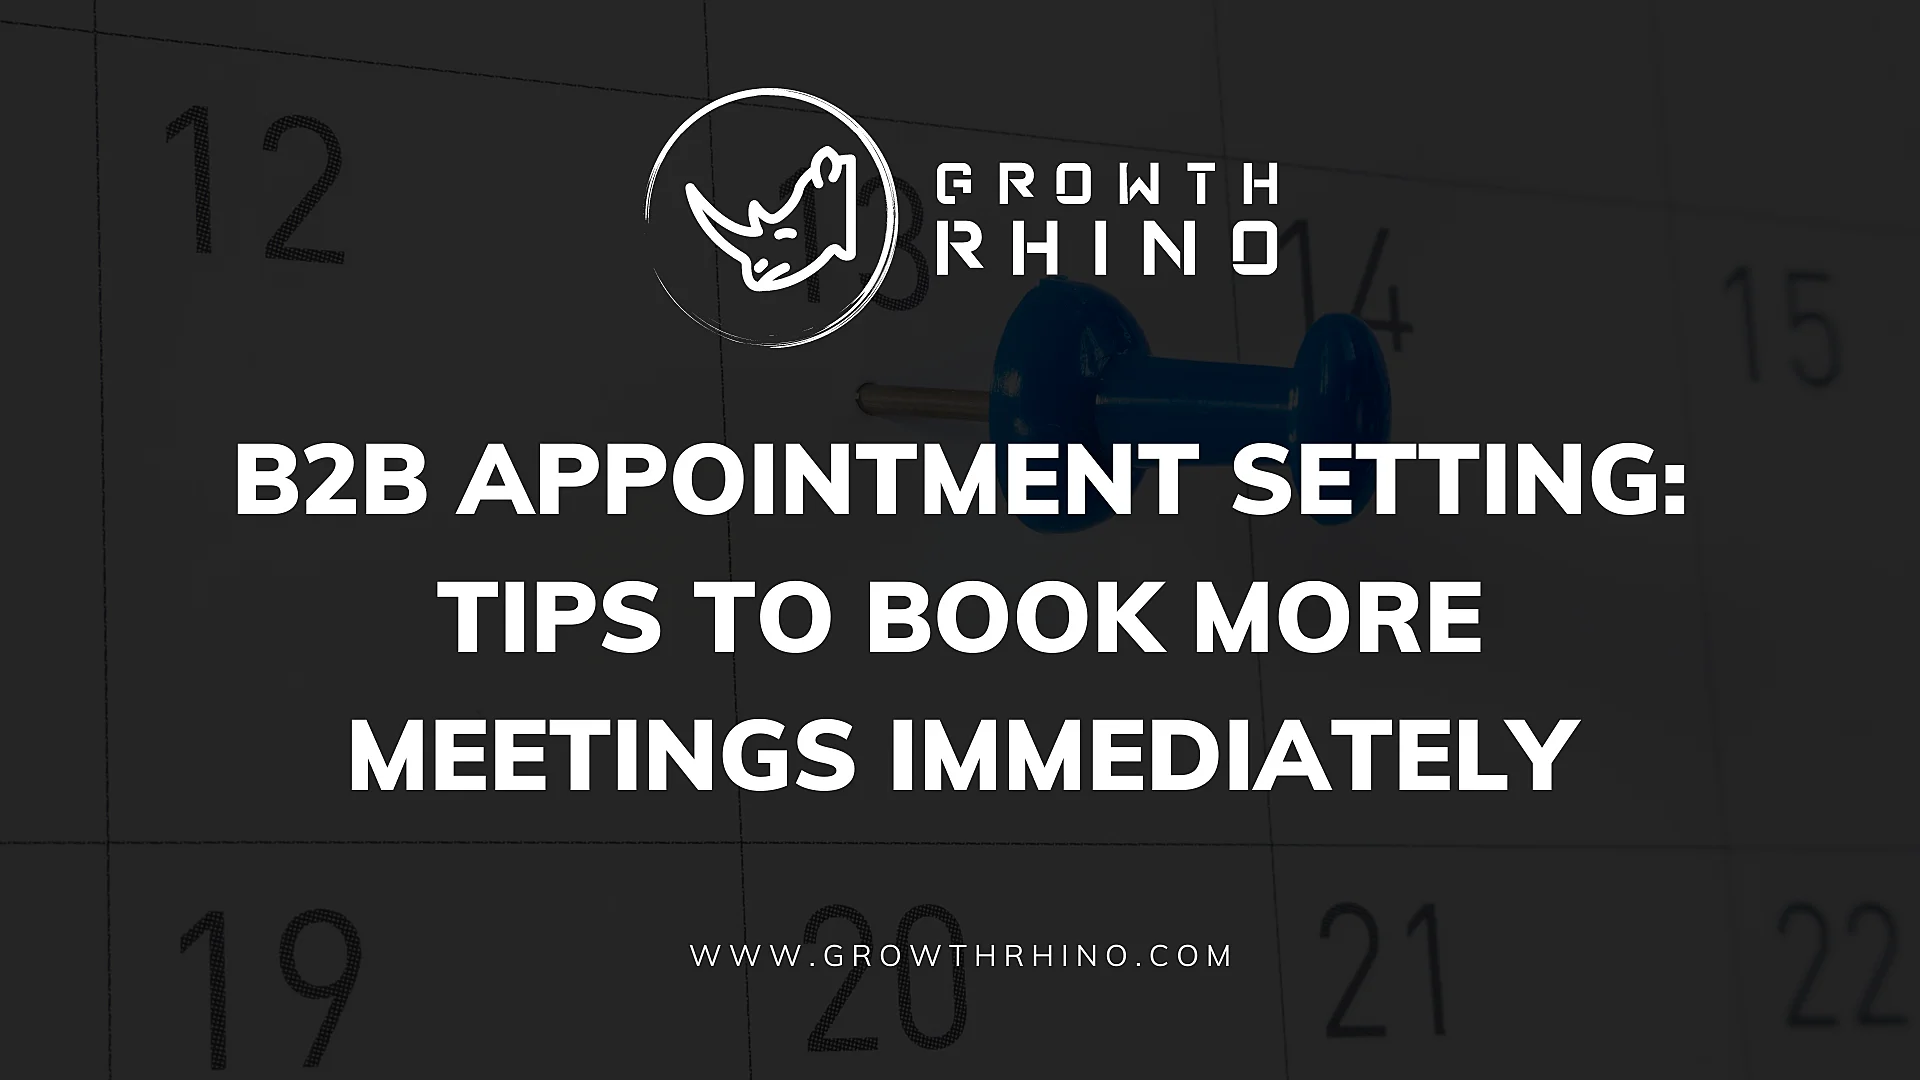 B2B Appointment Setting: Tips to Book More Meetings Immediately